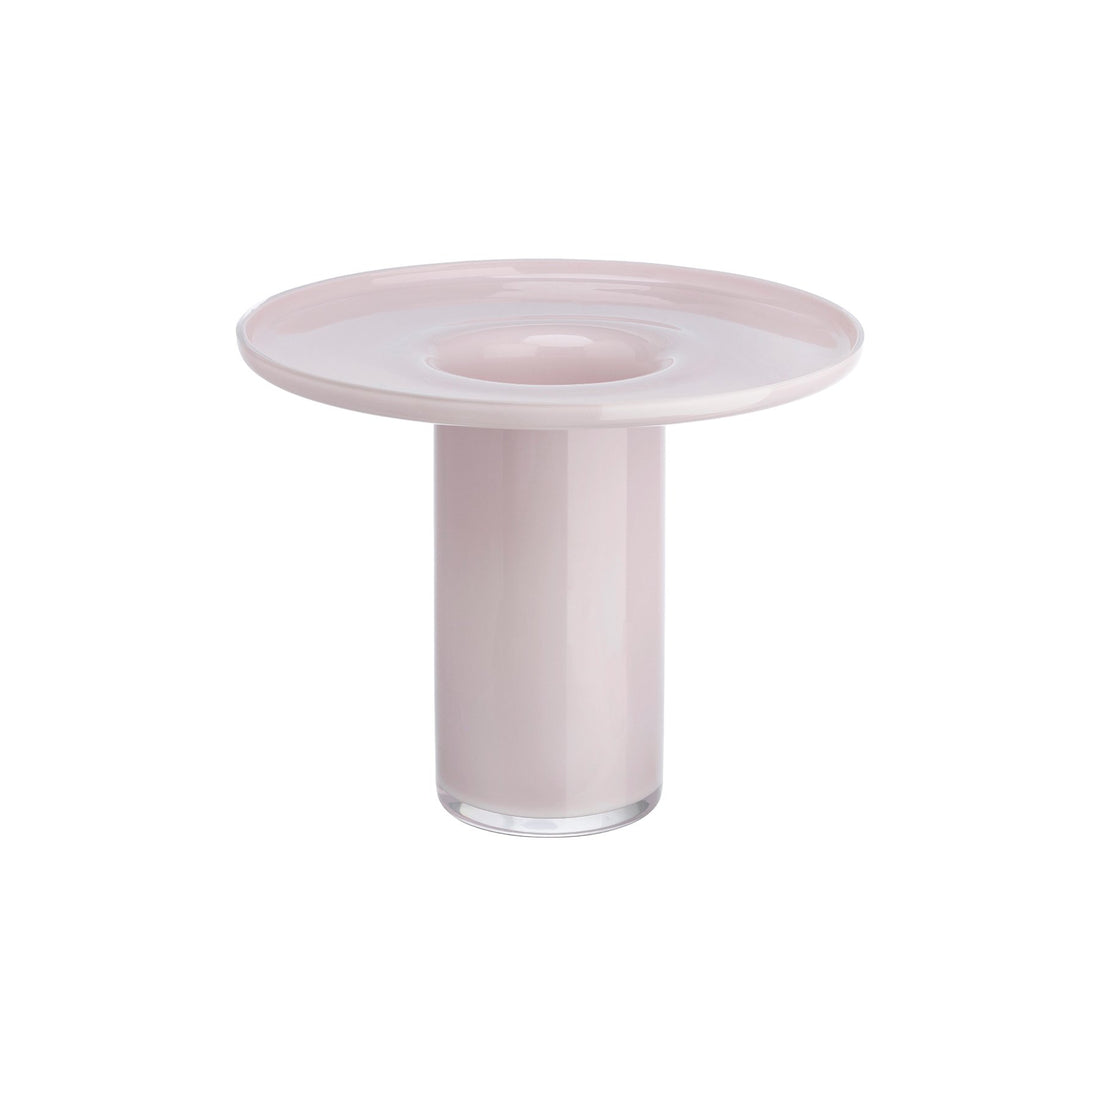 NUDE Bloom cakestand holder pink part which acts as a cylinder vase